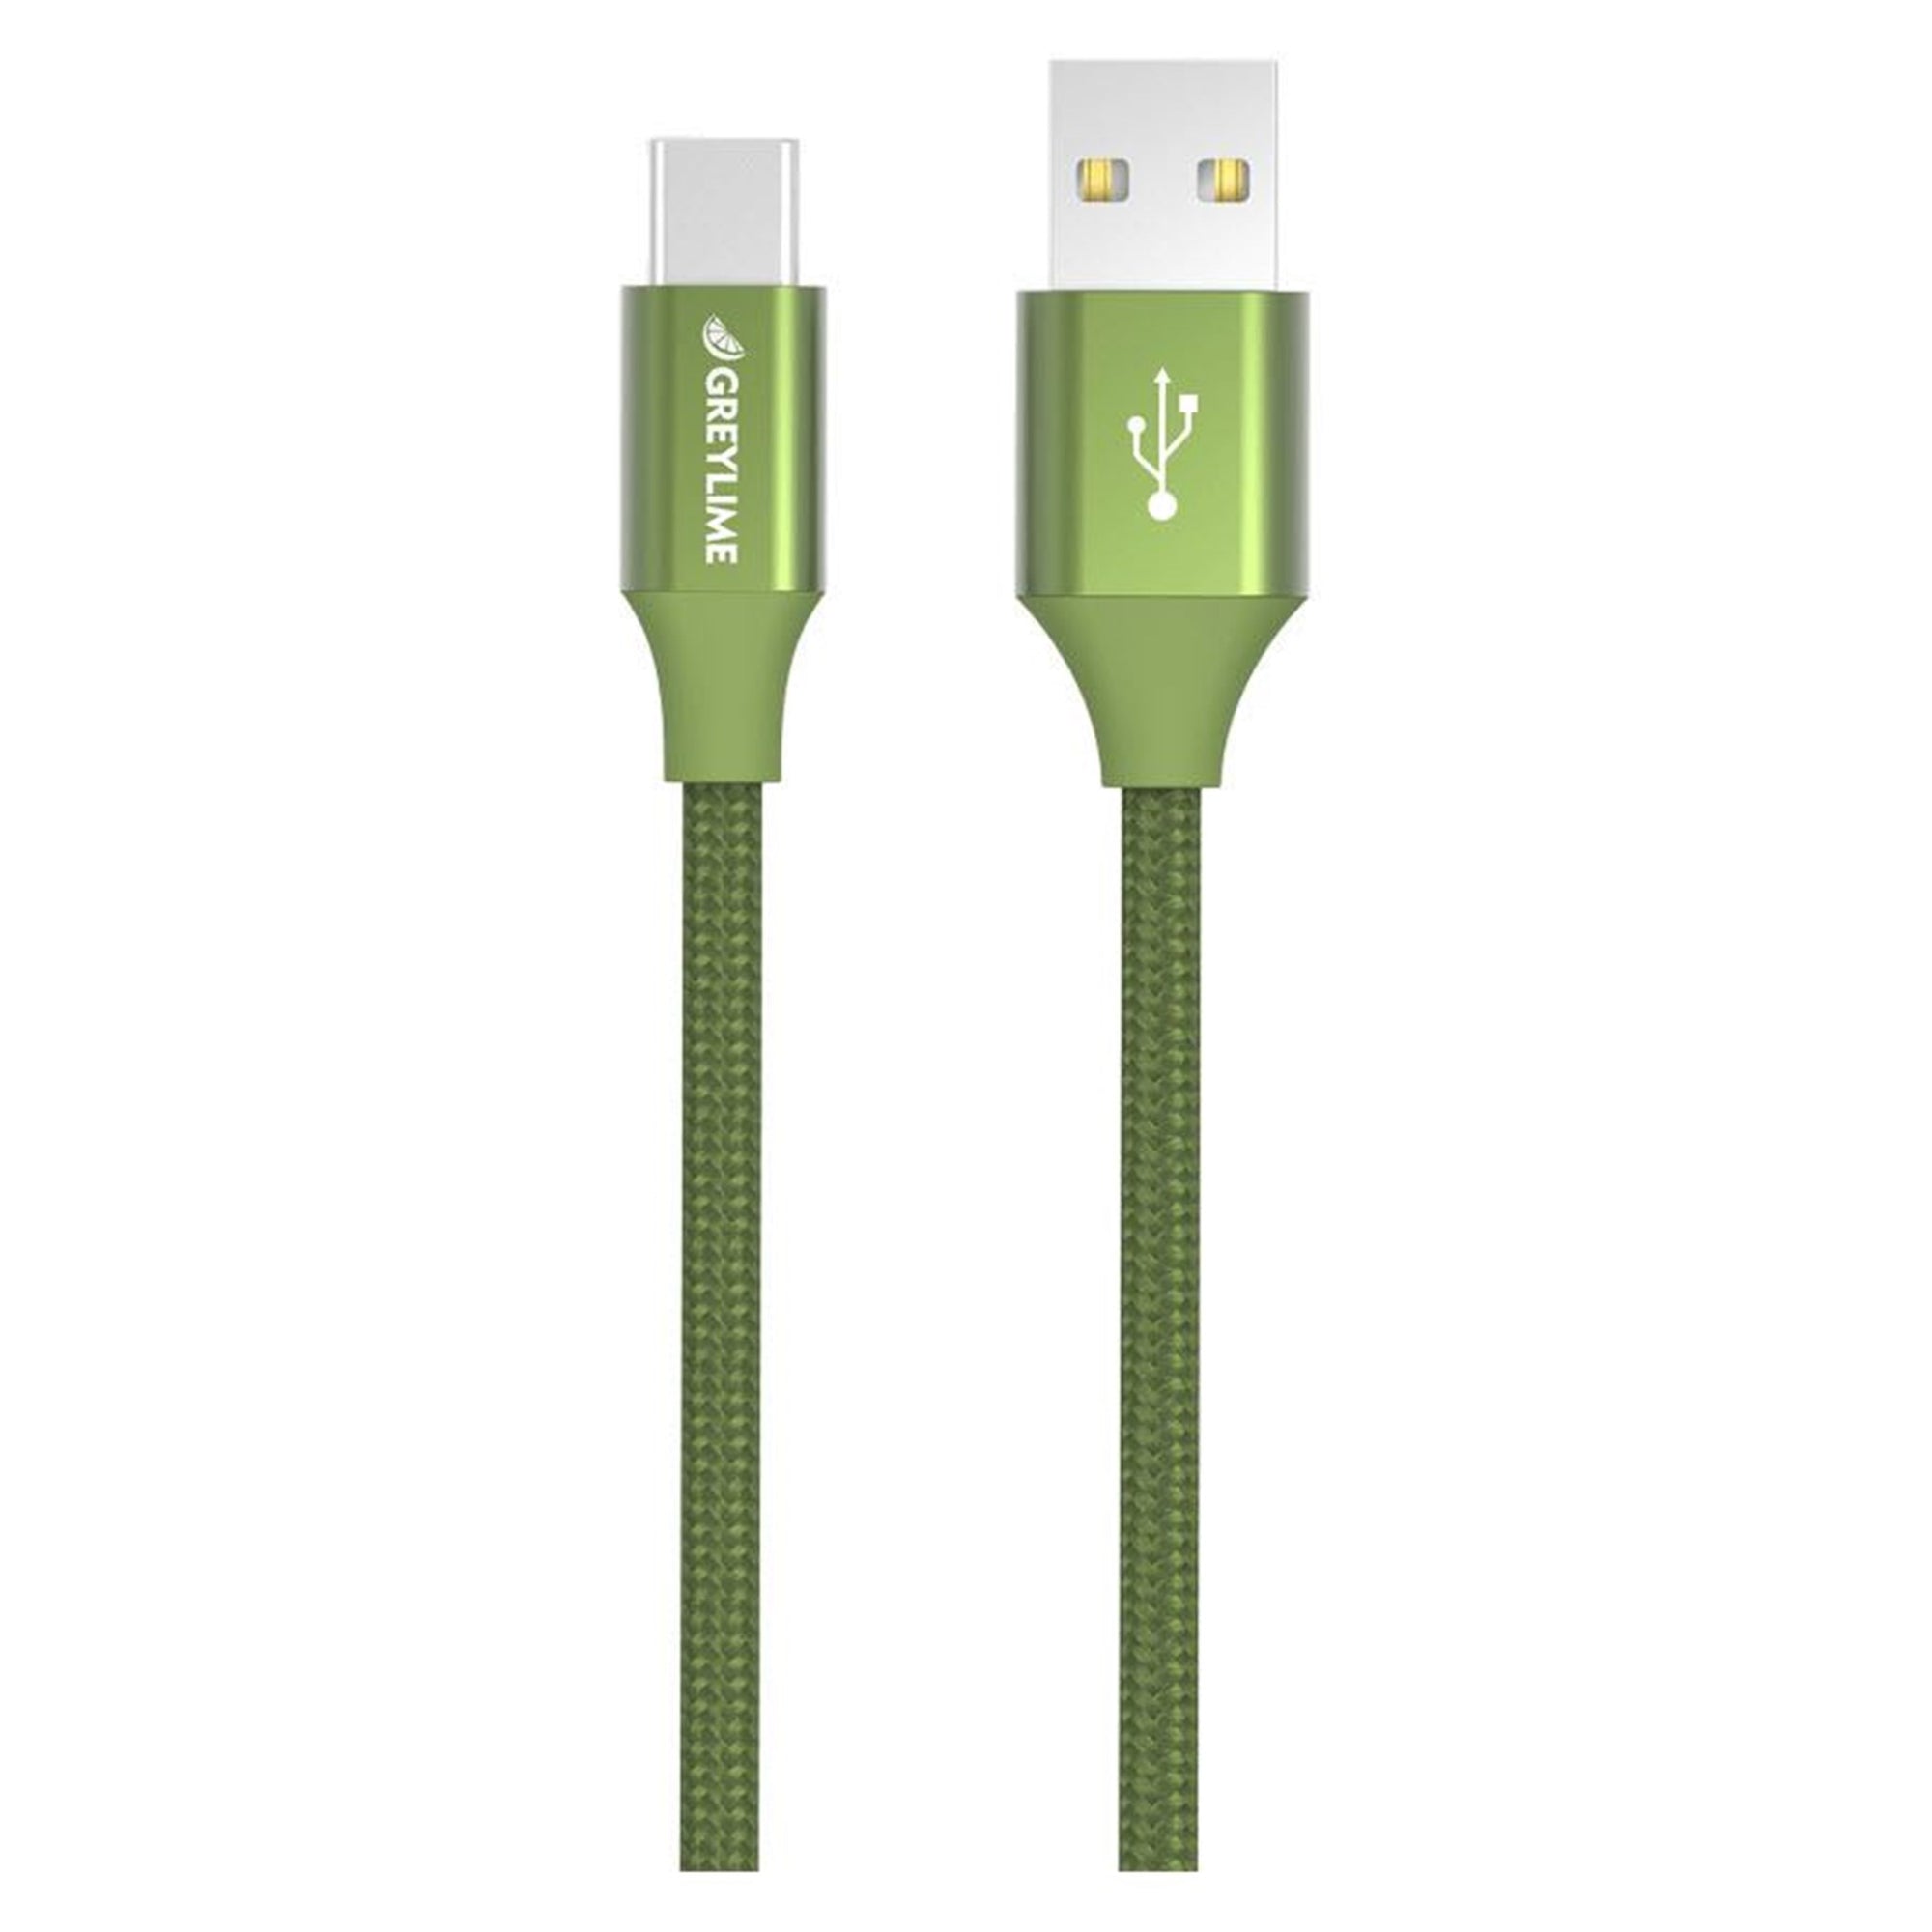 C21AC1M03-GreyLime-Braided-USB-A-to-USB-C-Cable-Groen-1-m_01.jpg